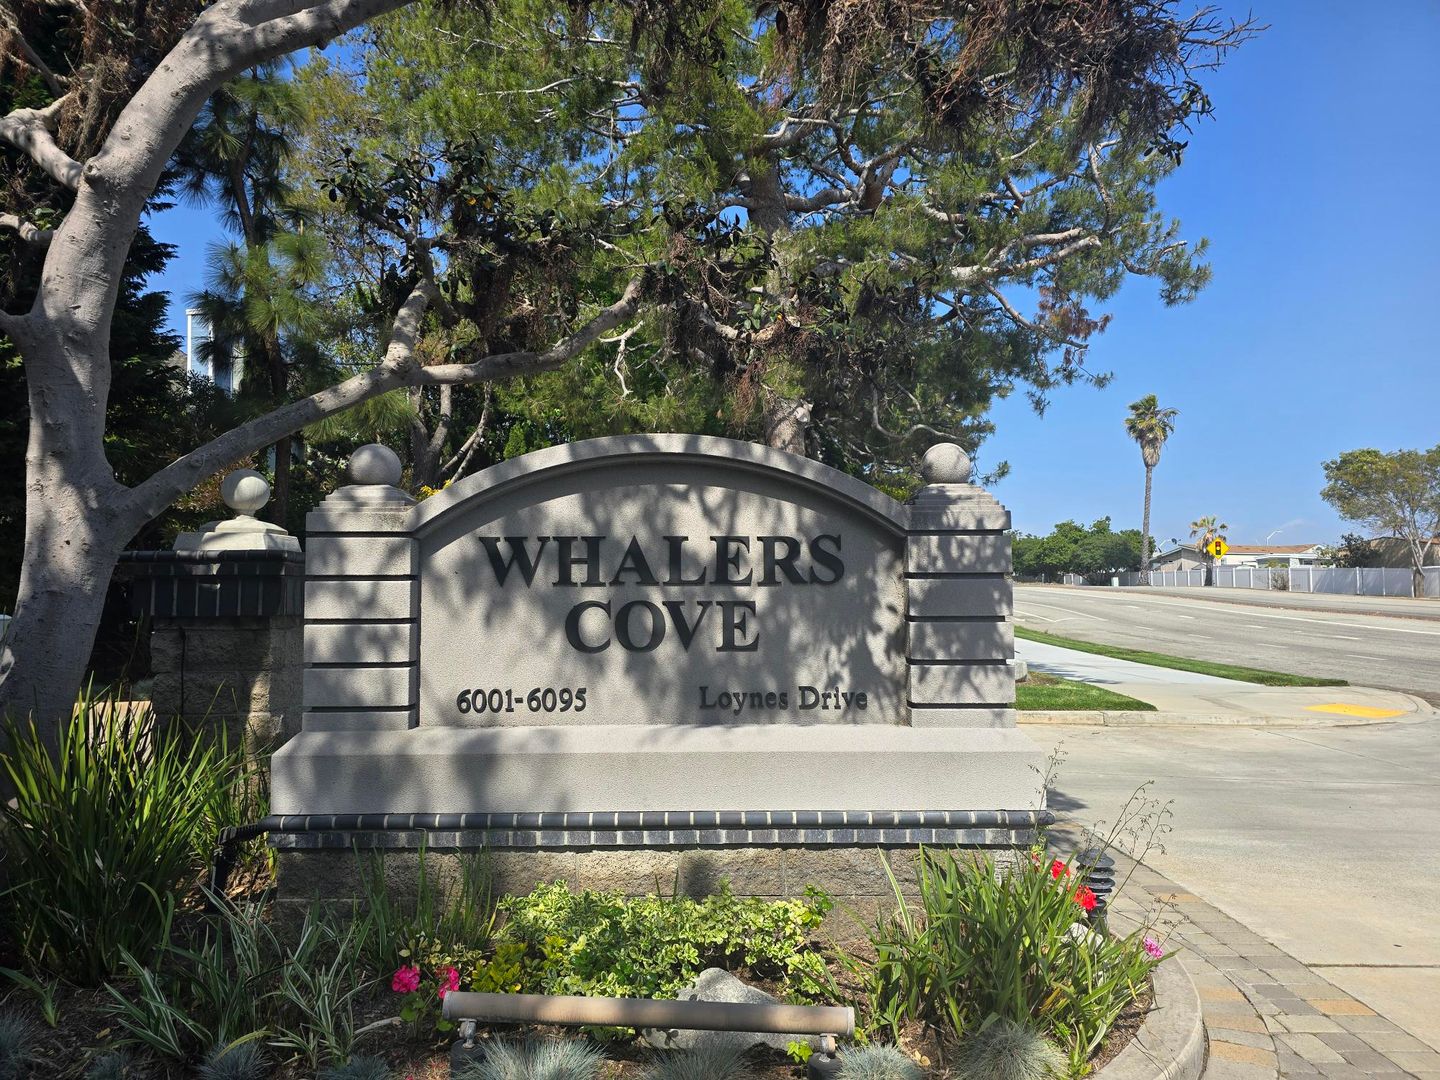 Whalers Cove Gated Community: 3 Bedroom 3 Bath Attached 2 Story Home,